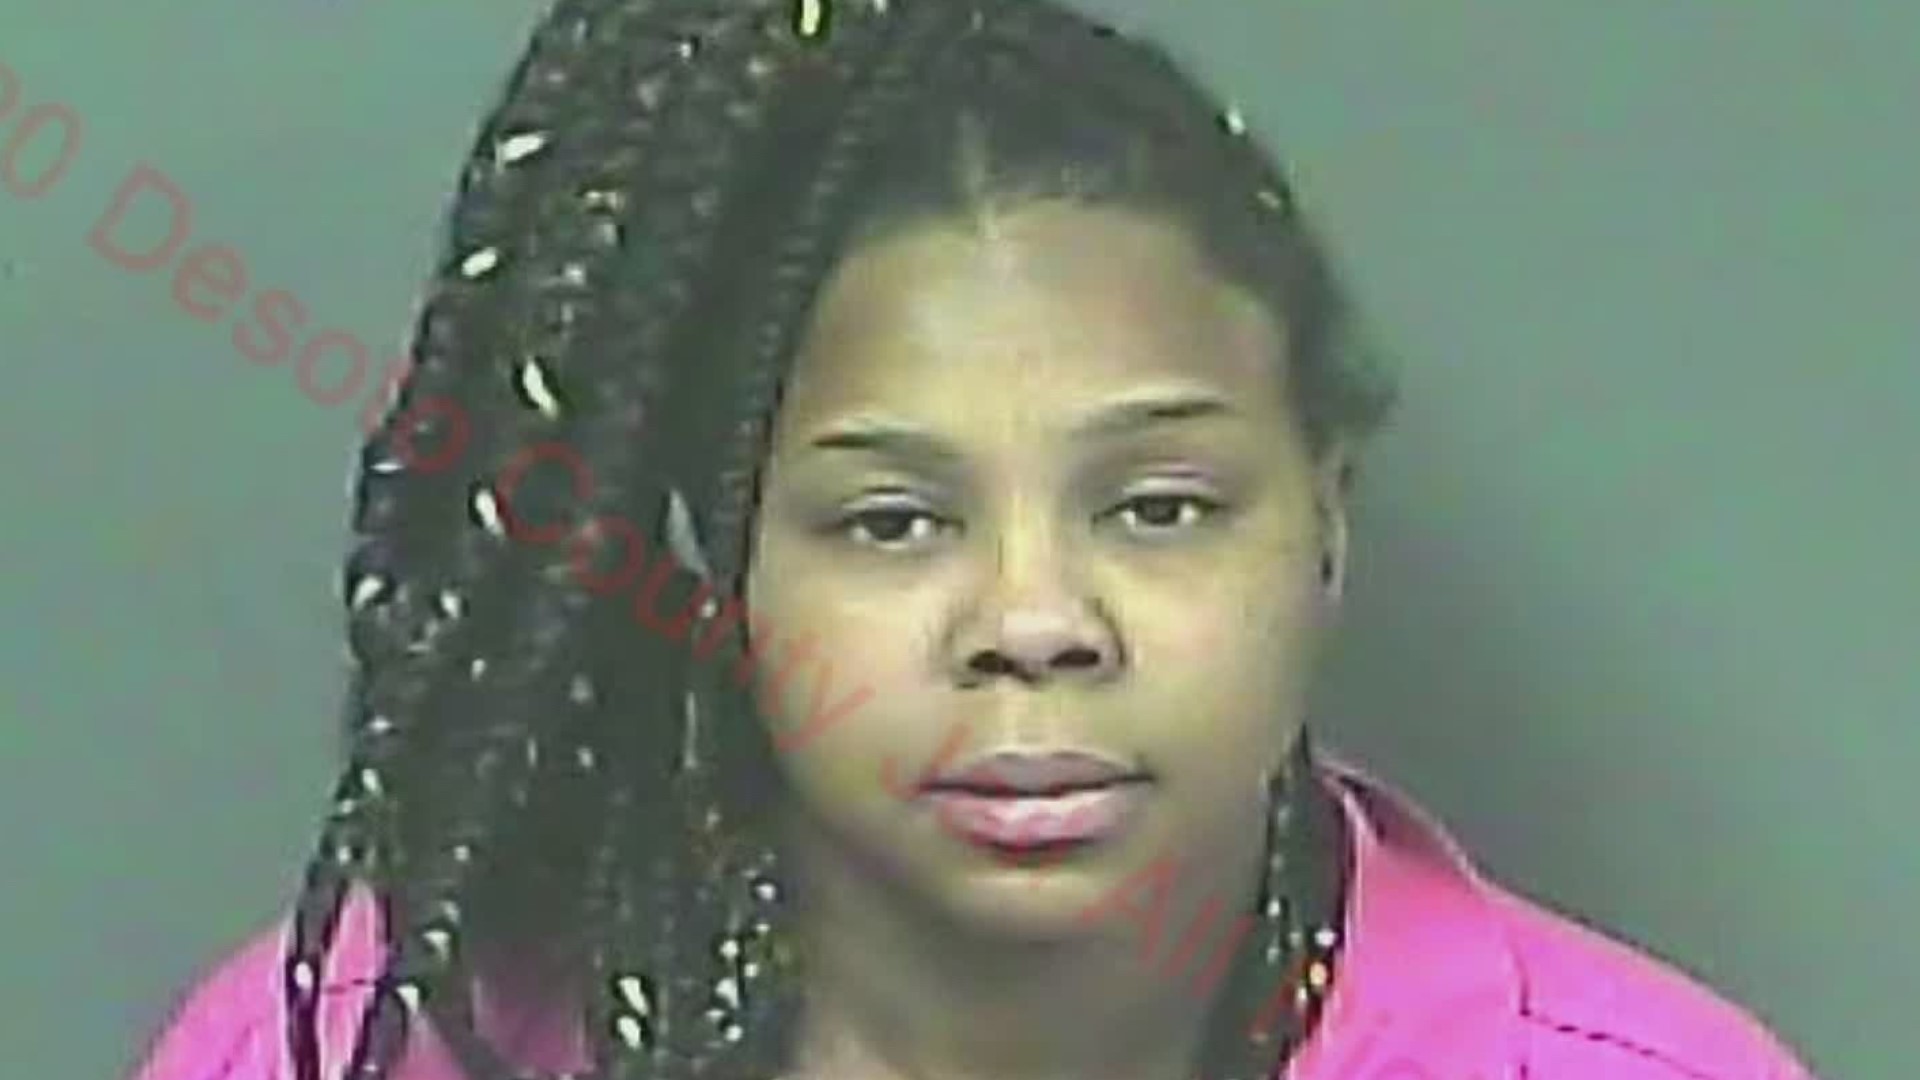 "Welcome to Sweetie Pie's" star and owner also faces conspiracy charges.